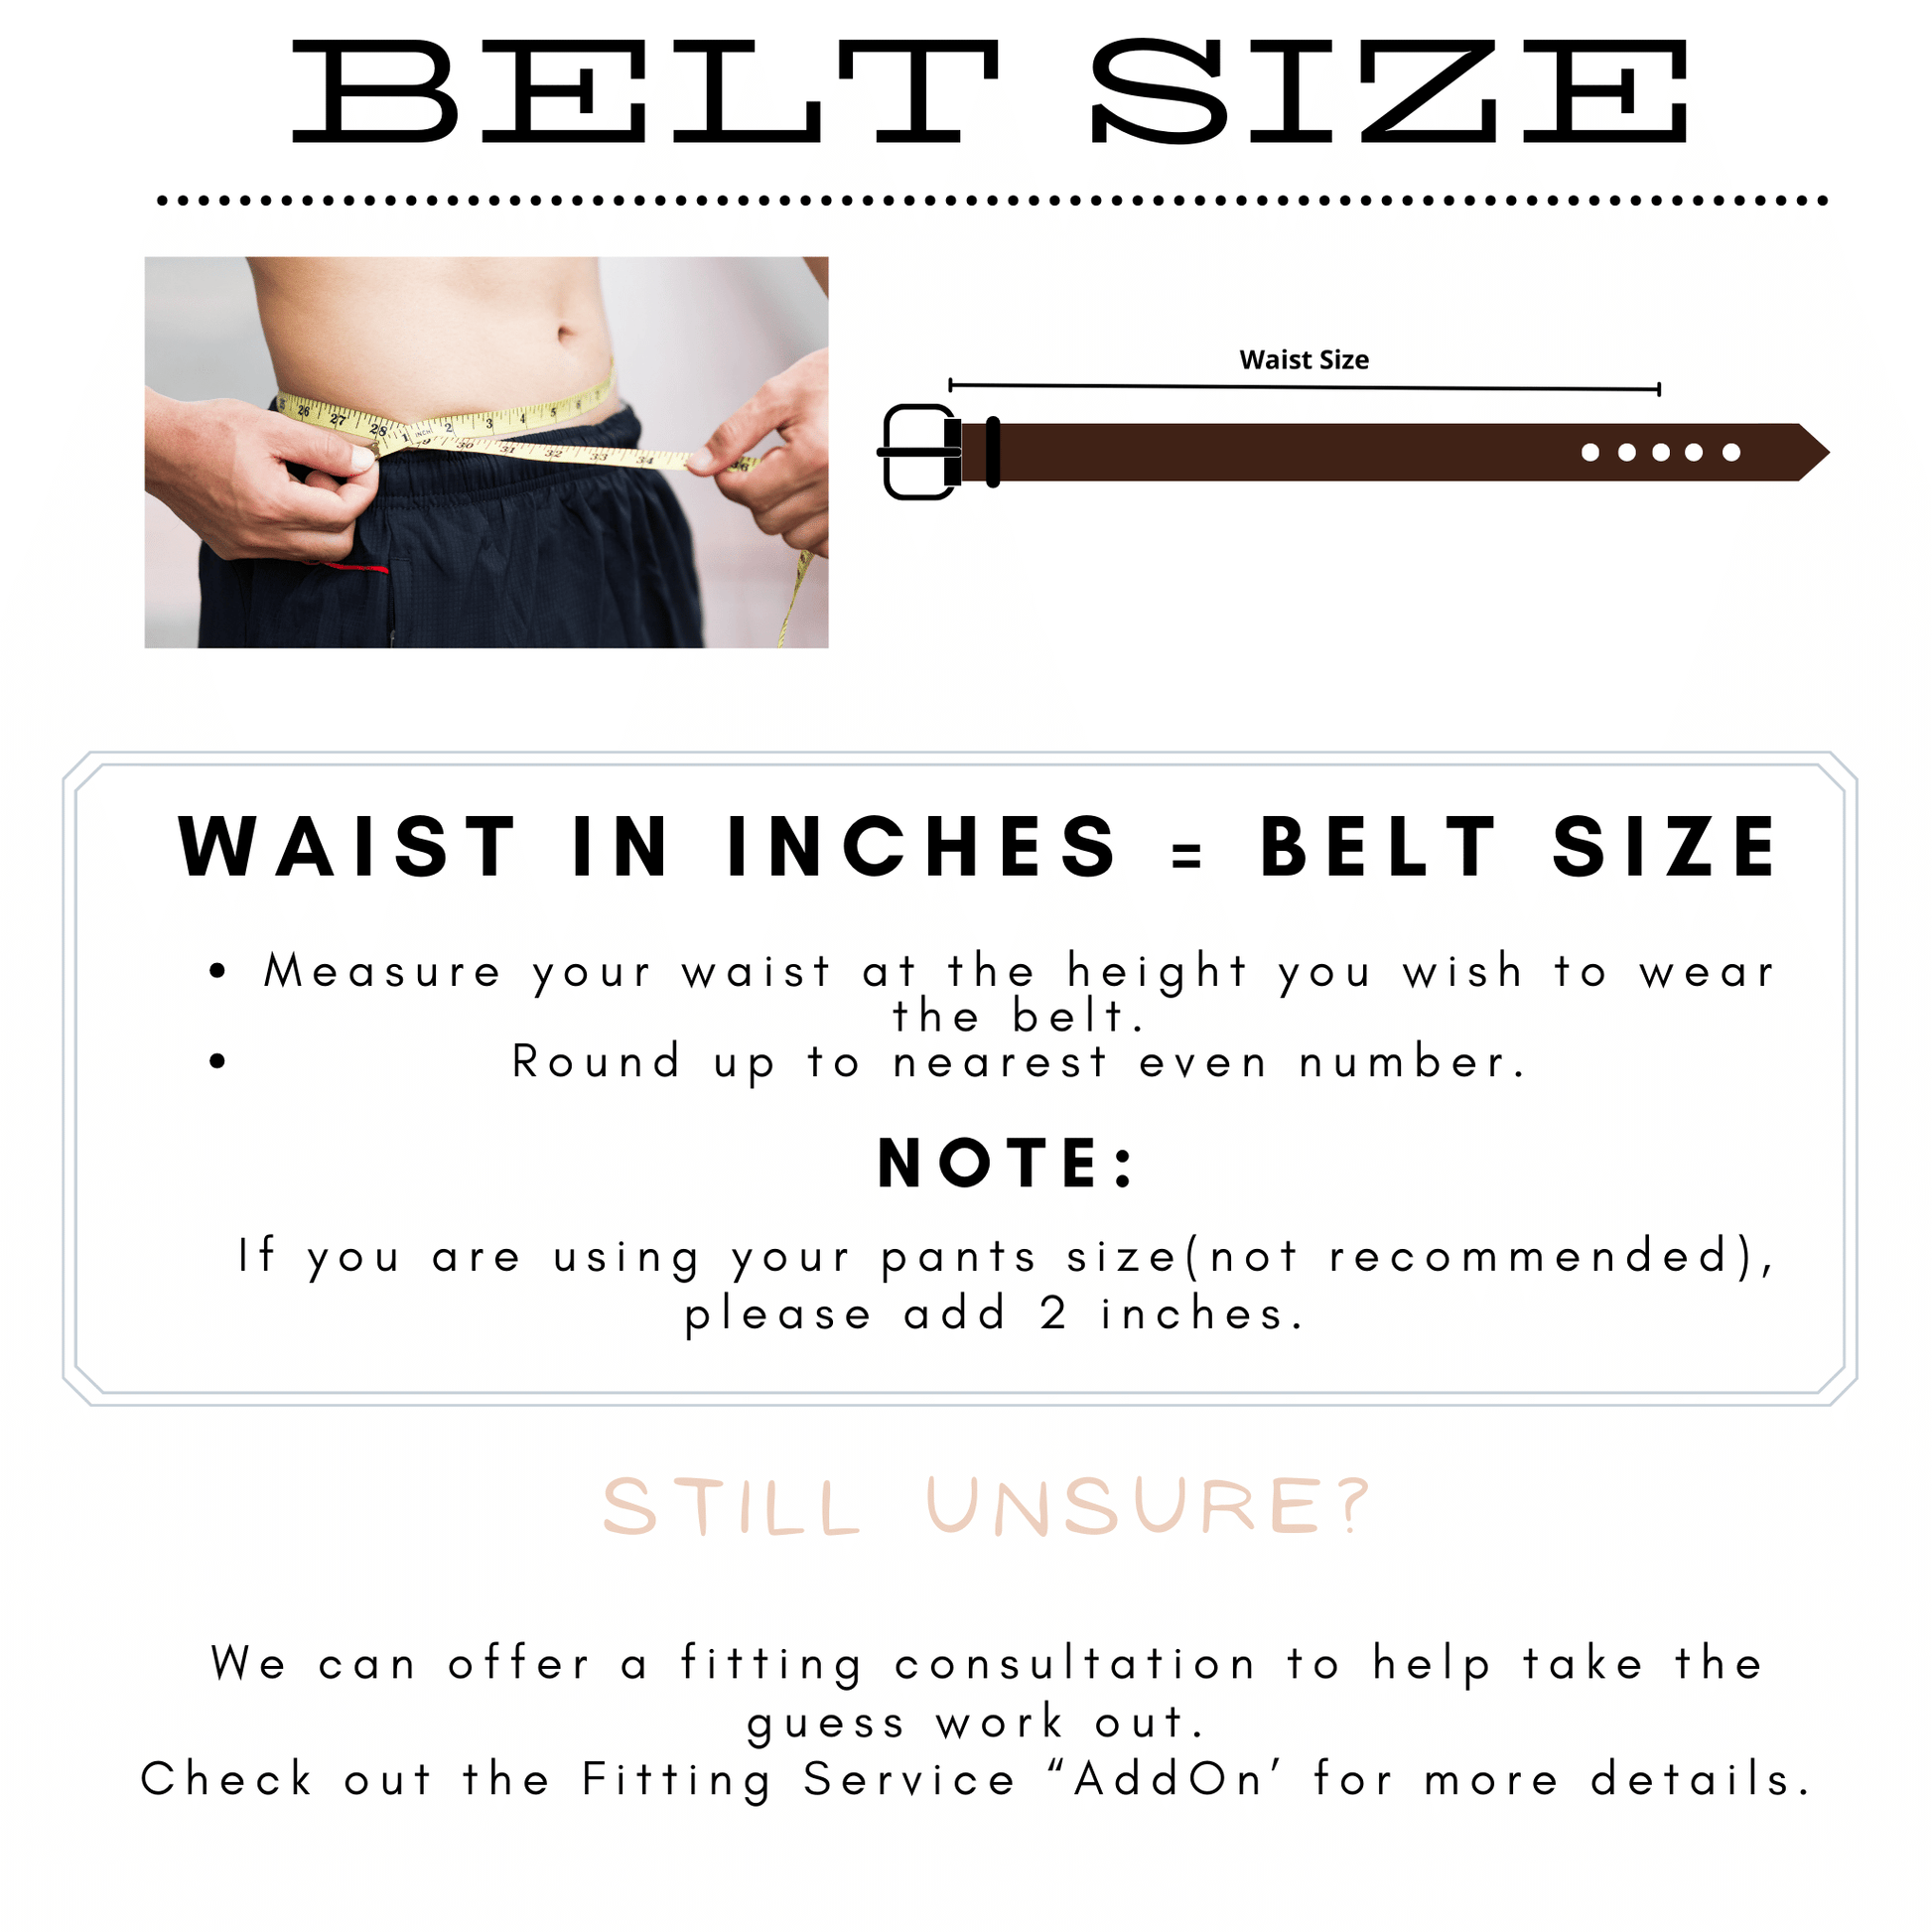 Belt Sizing Advice - Measure Waist or Add 2 inches to pants size.